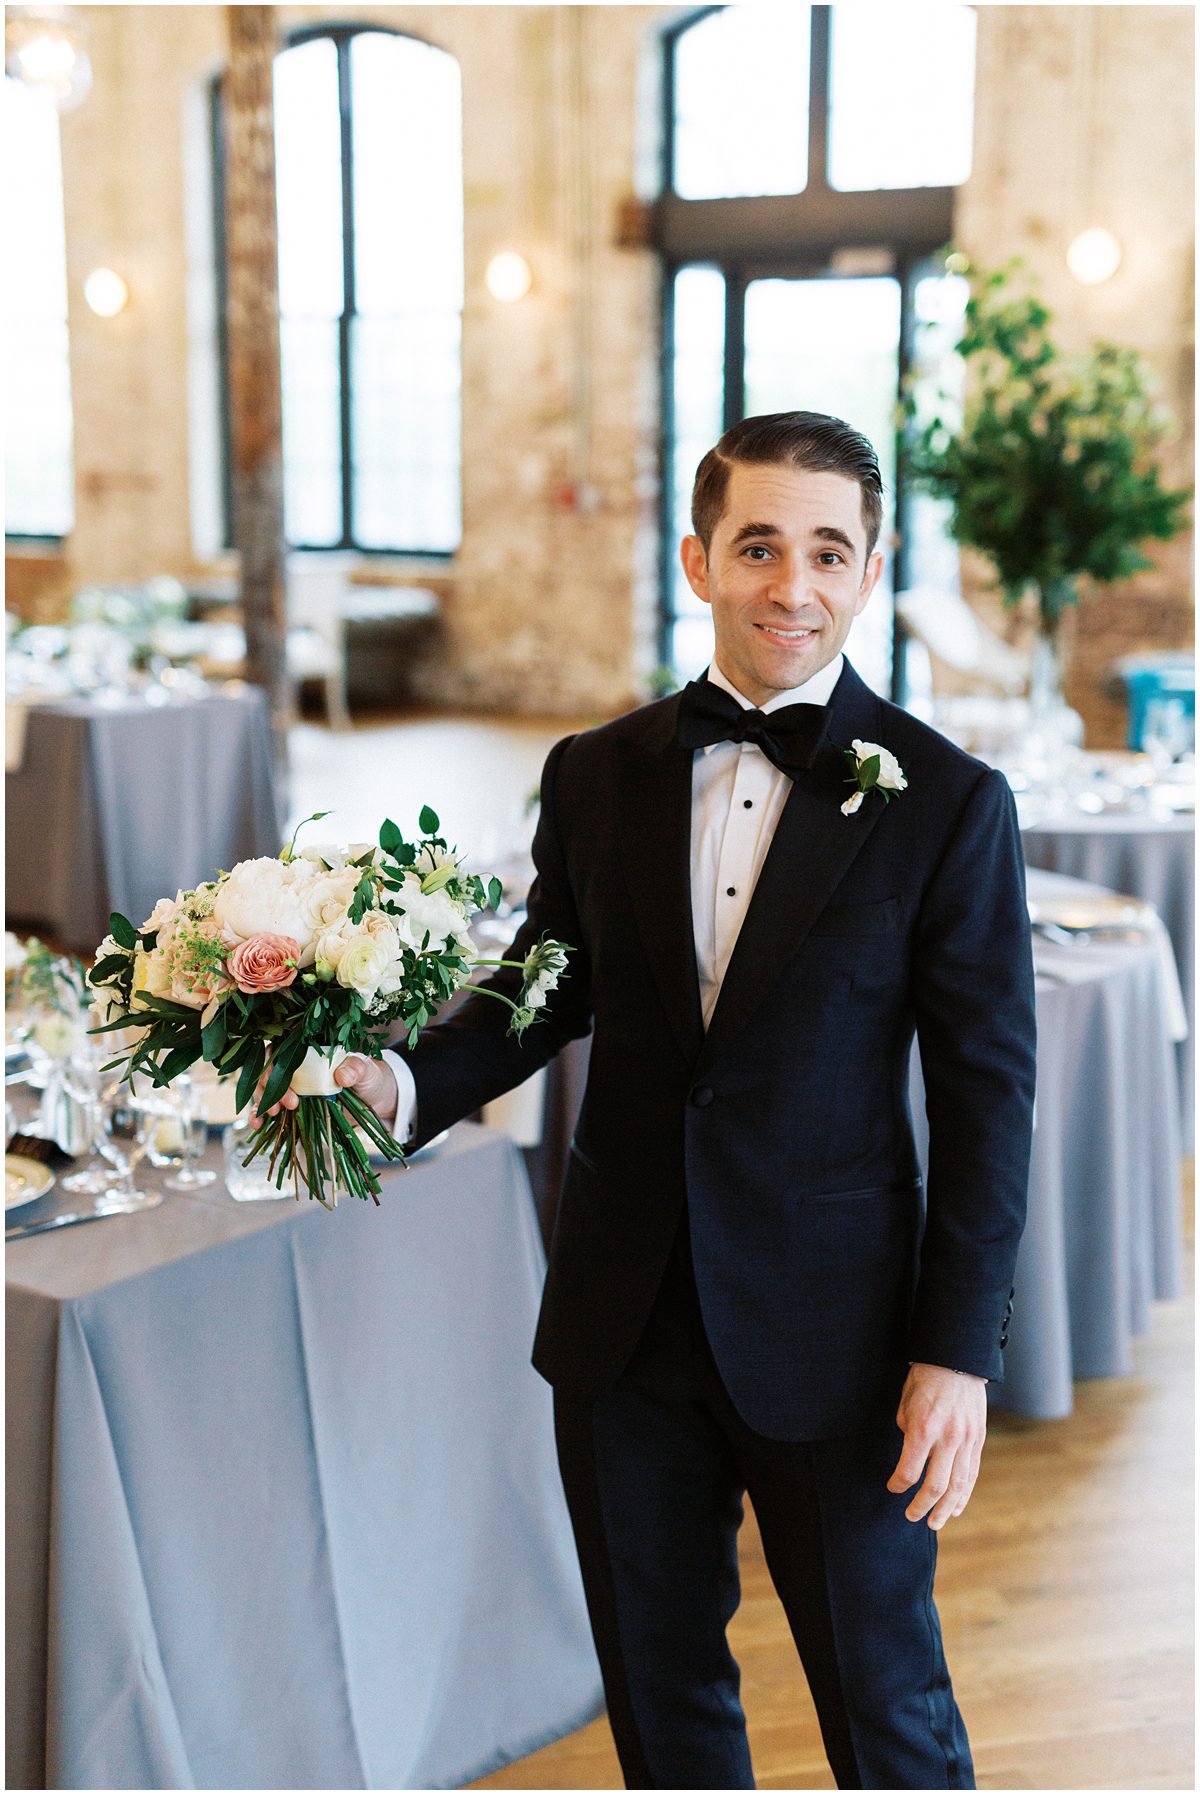 cute photo of groom holding the brides bouquet